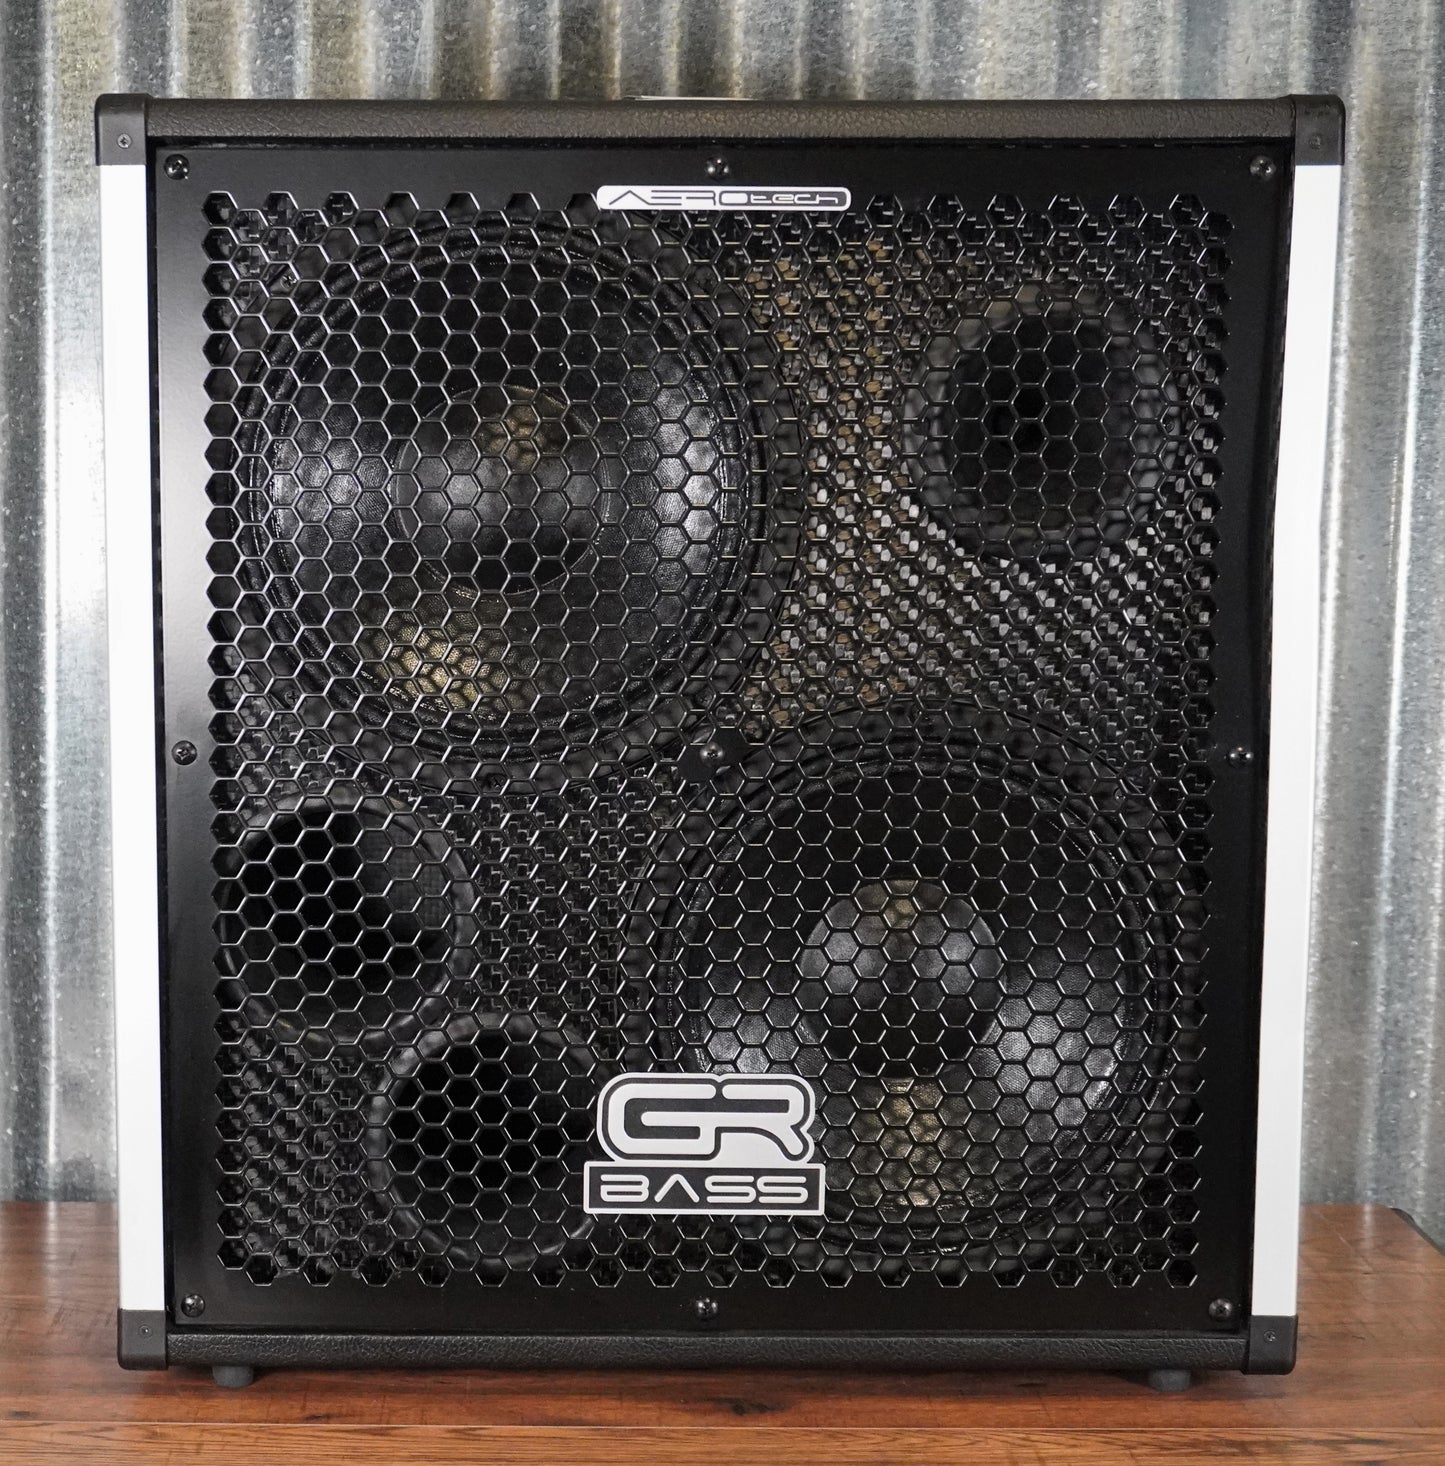 GR Bass AT210 2x10" AeroTech Carbon Fiber Bass Amplifier Speaker Cabinet Black 4 Ohm Used